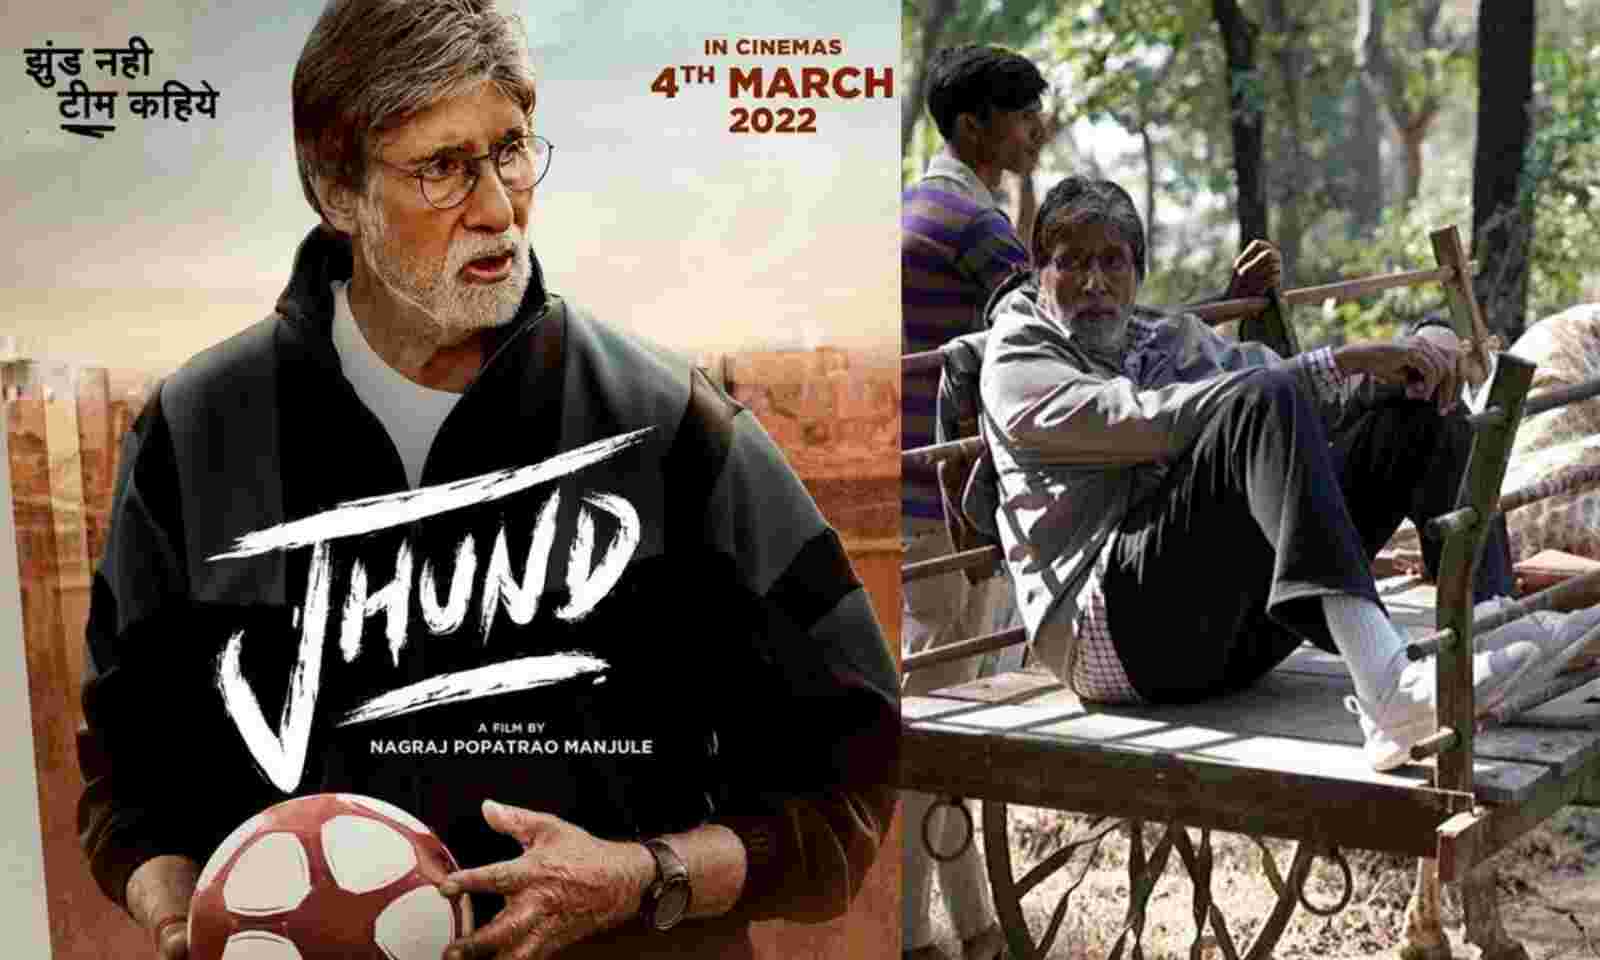 Amitabh Bachchan-led sports film Jhund readies for a March release